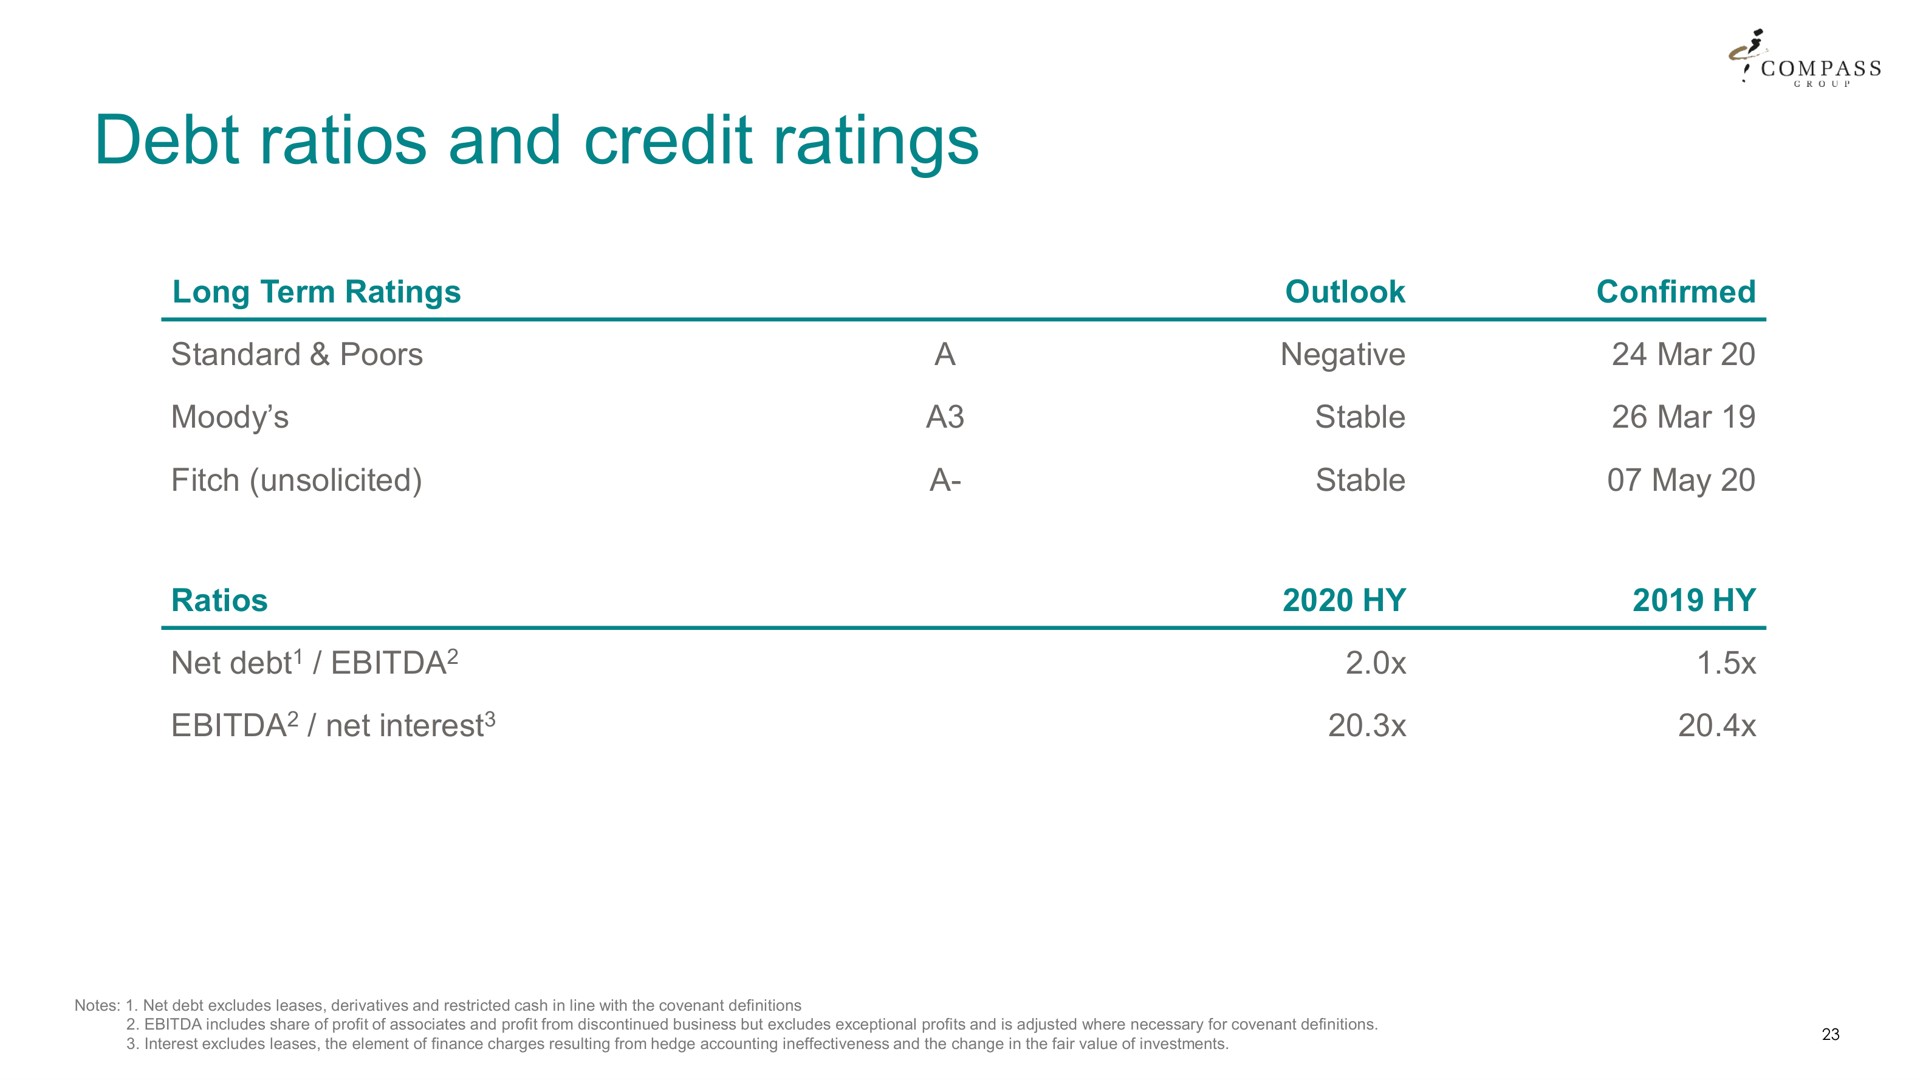 debt ratios and credit ratings | Compass Group